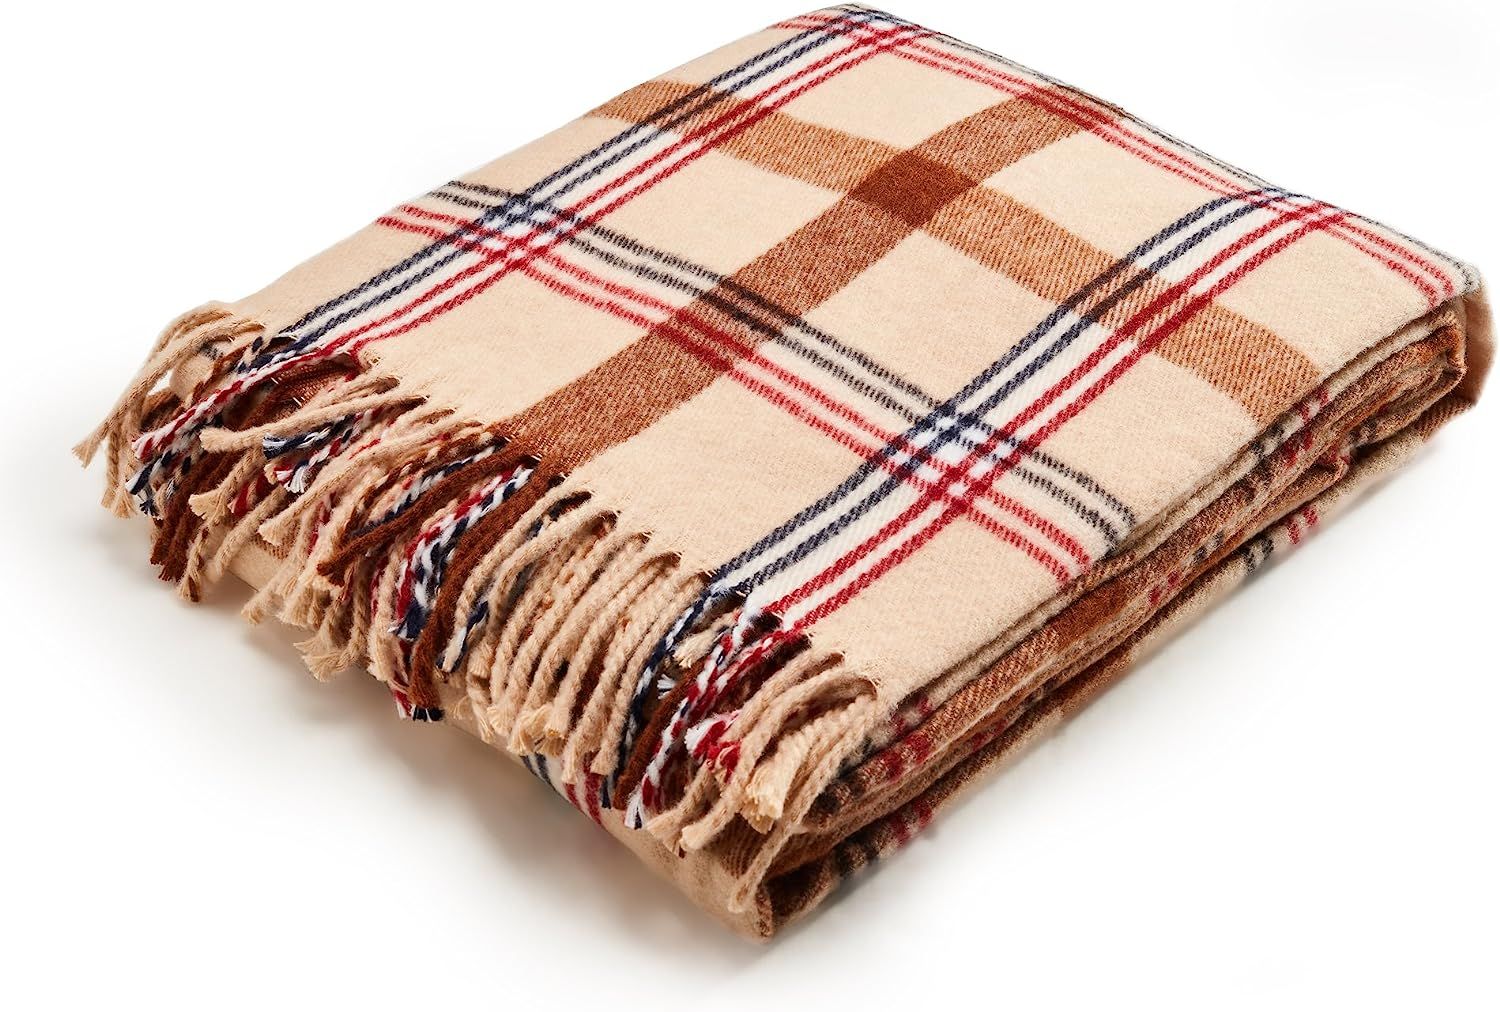 Arus Highlands Collection Tartan Plaid Design Throw Blanket, 60 by 80 Inches, Sahara | Amazon (US)